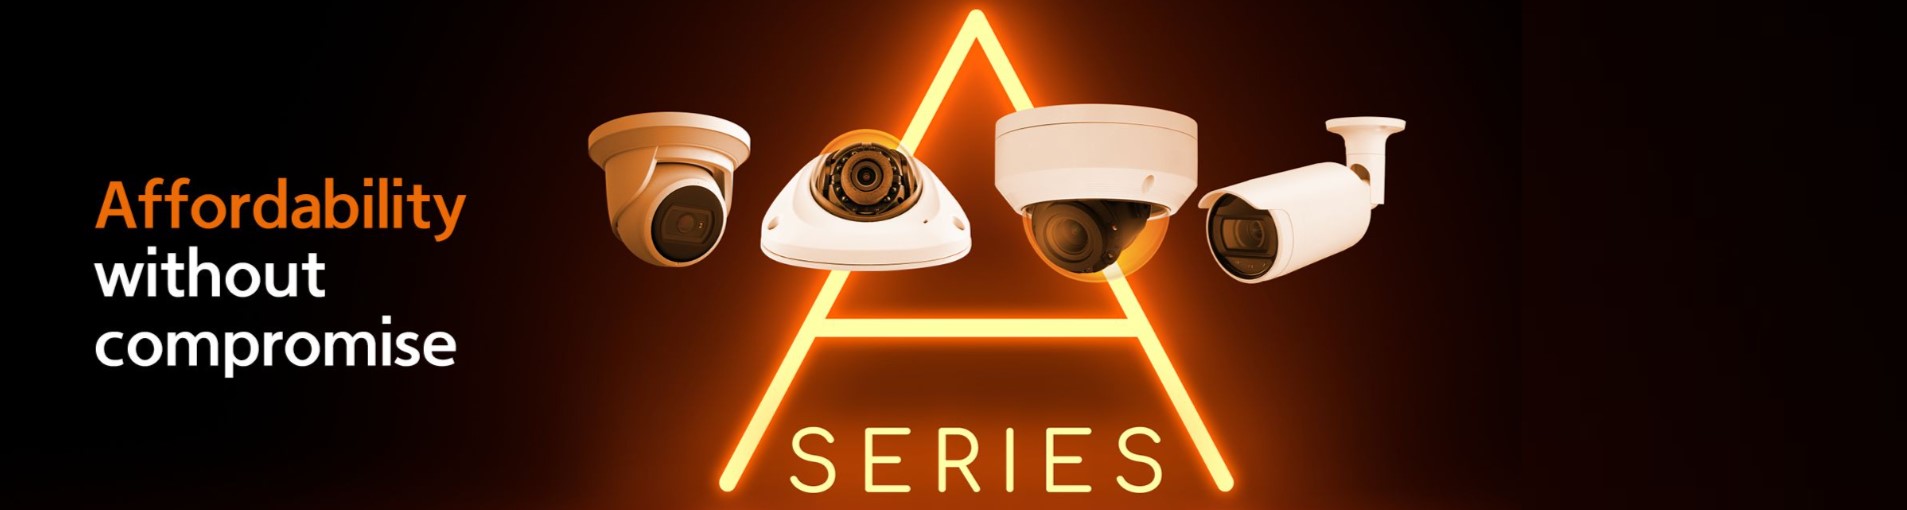 Elevate Your Security with Hanwha Wisenet CCTV Cameras: The Ultimate Guide for CCTV Shopping Enthusiasts